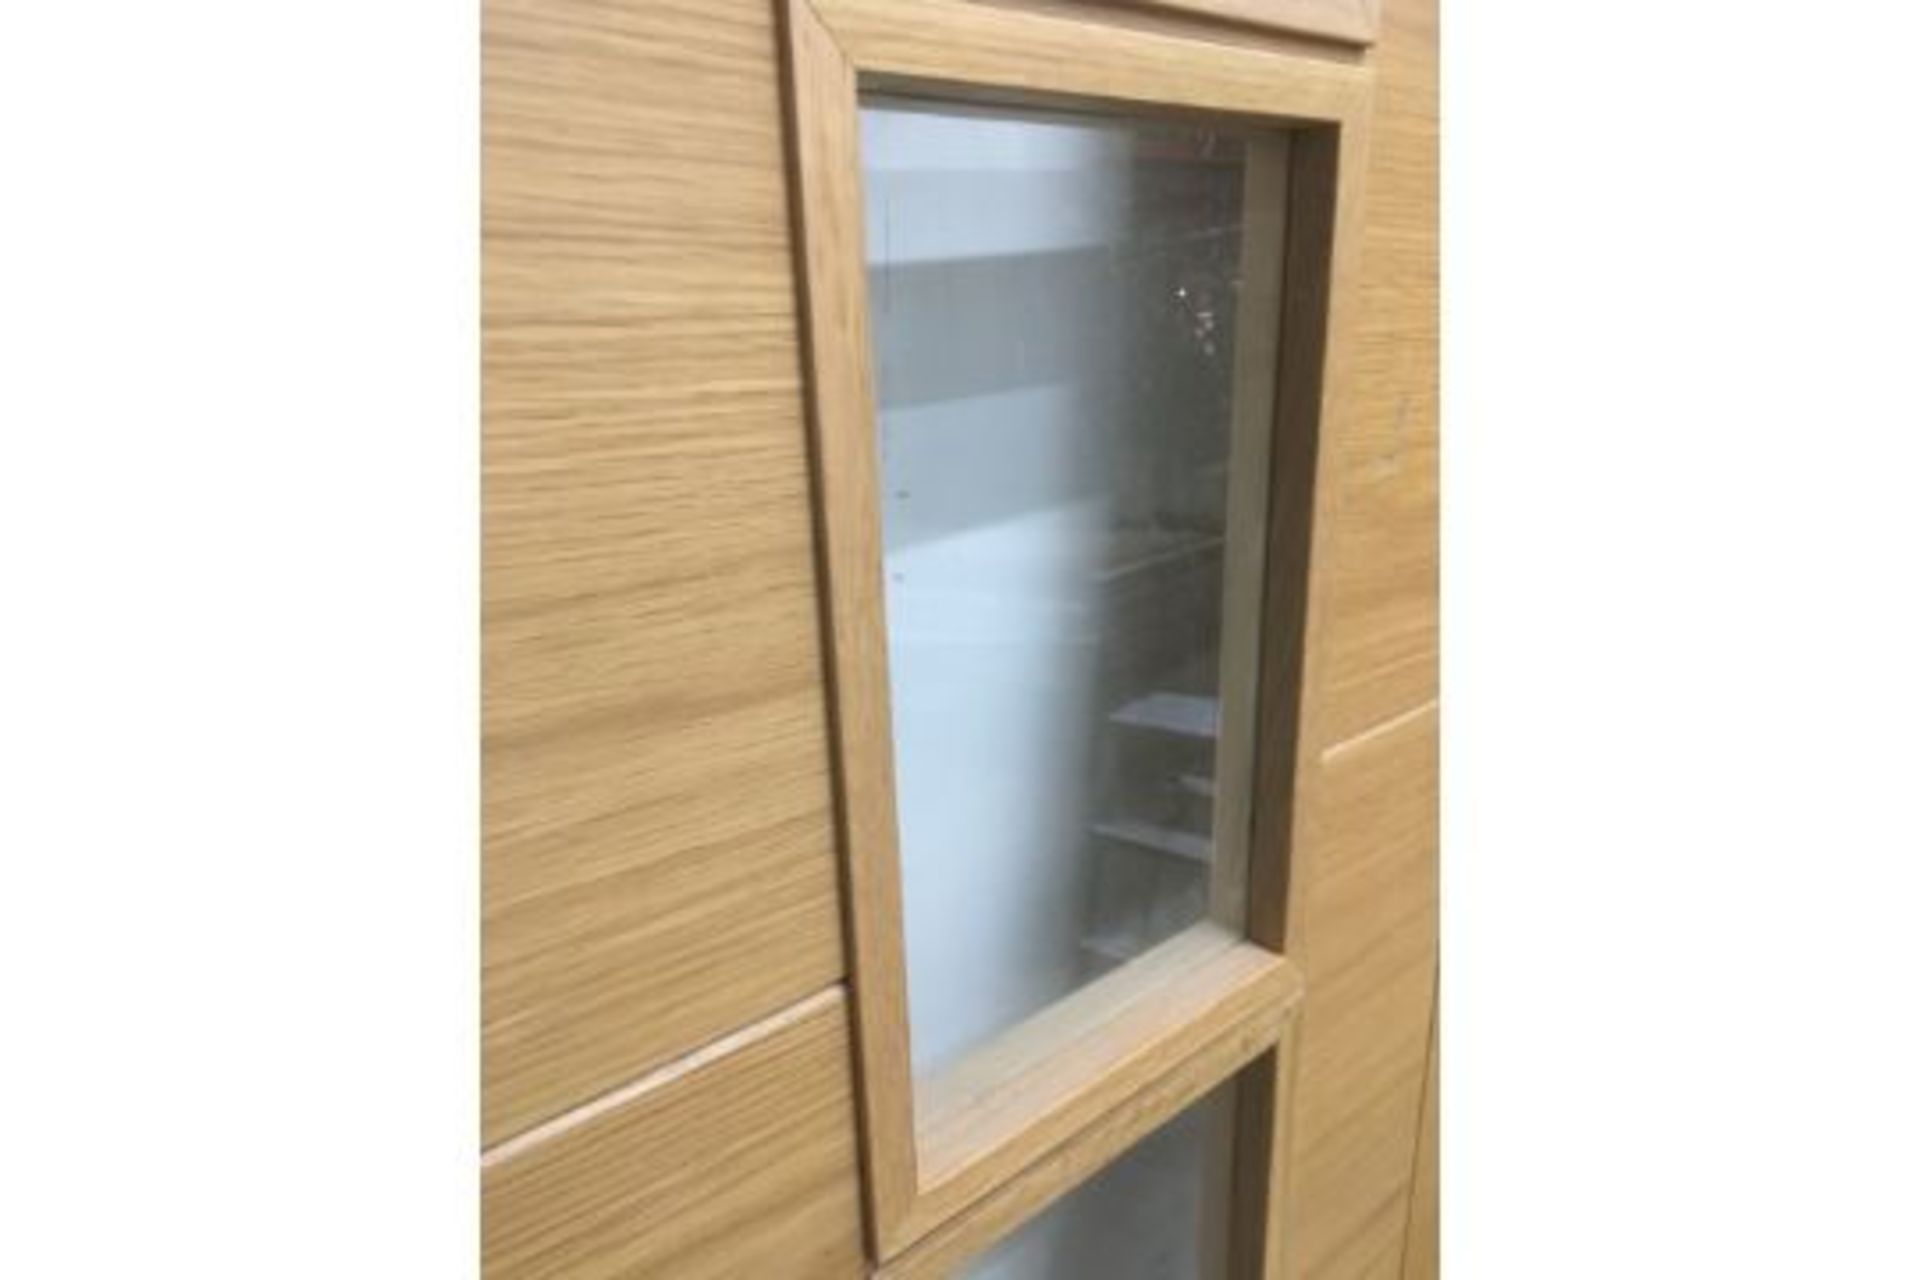 4-Port Clear Glazed Pre-Finished Wooden Door | 1982mm x 763mm x 35mm - Image 2 of 4